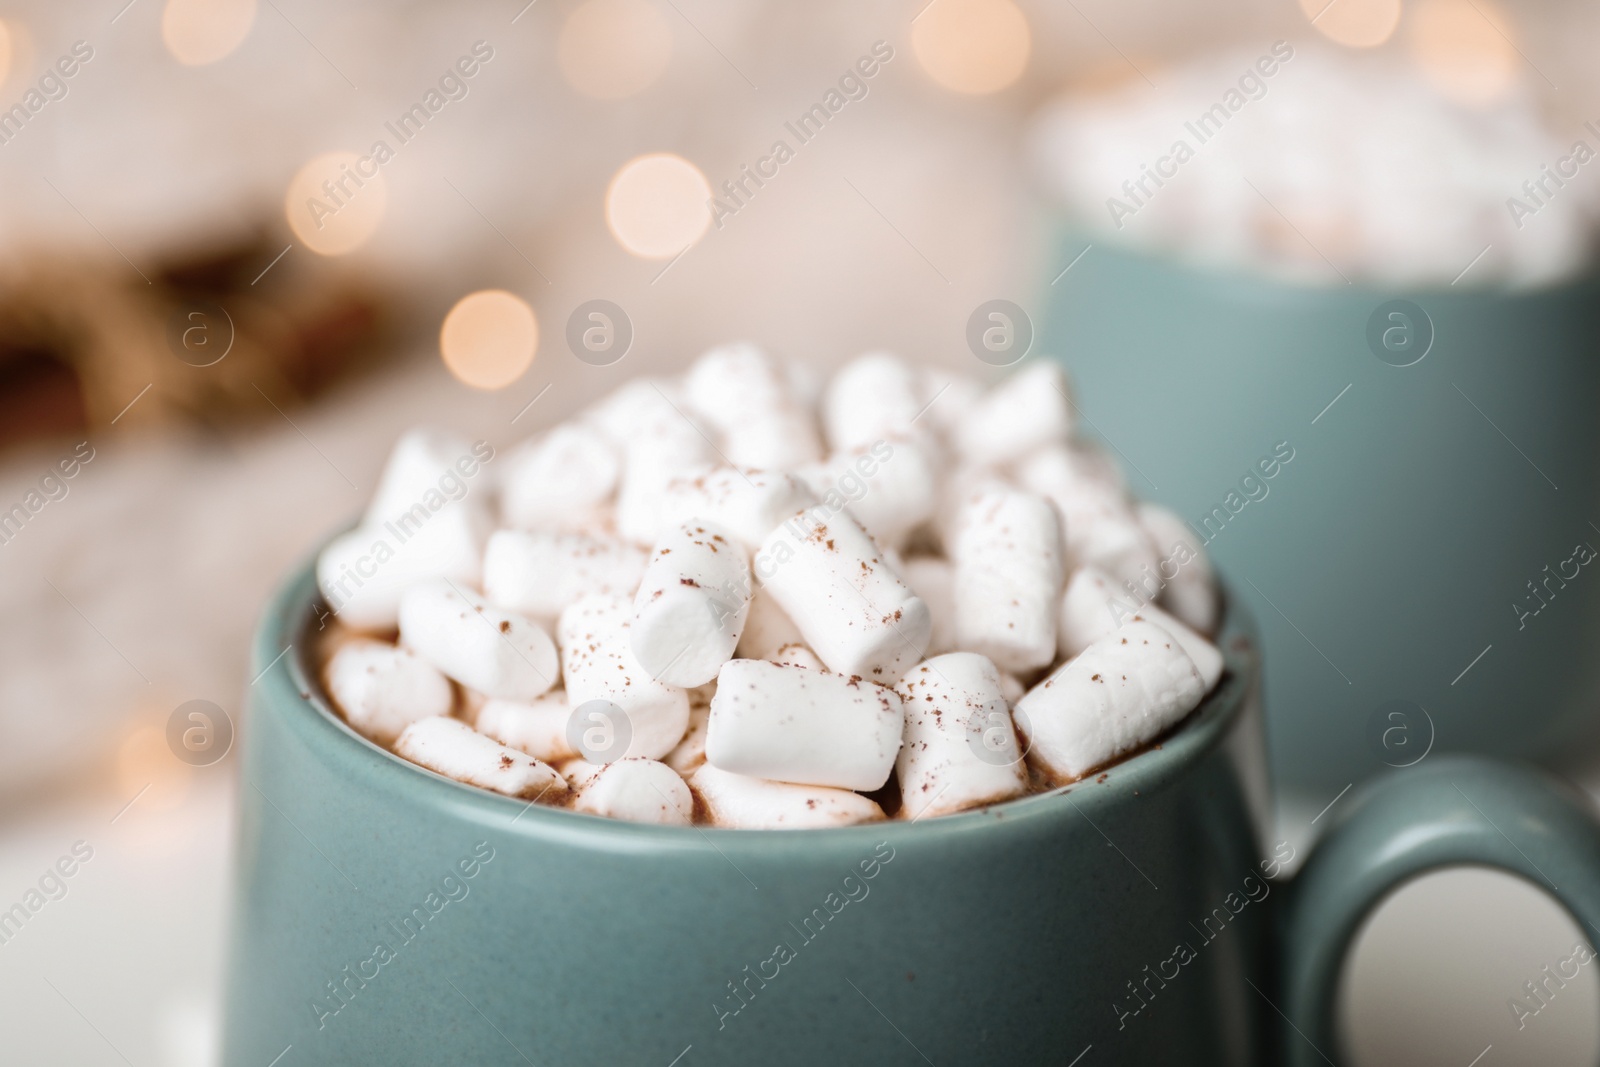 Photo of Delicious cocoa drink with marshmallows on table against blurred lights, closeup